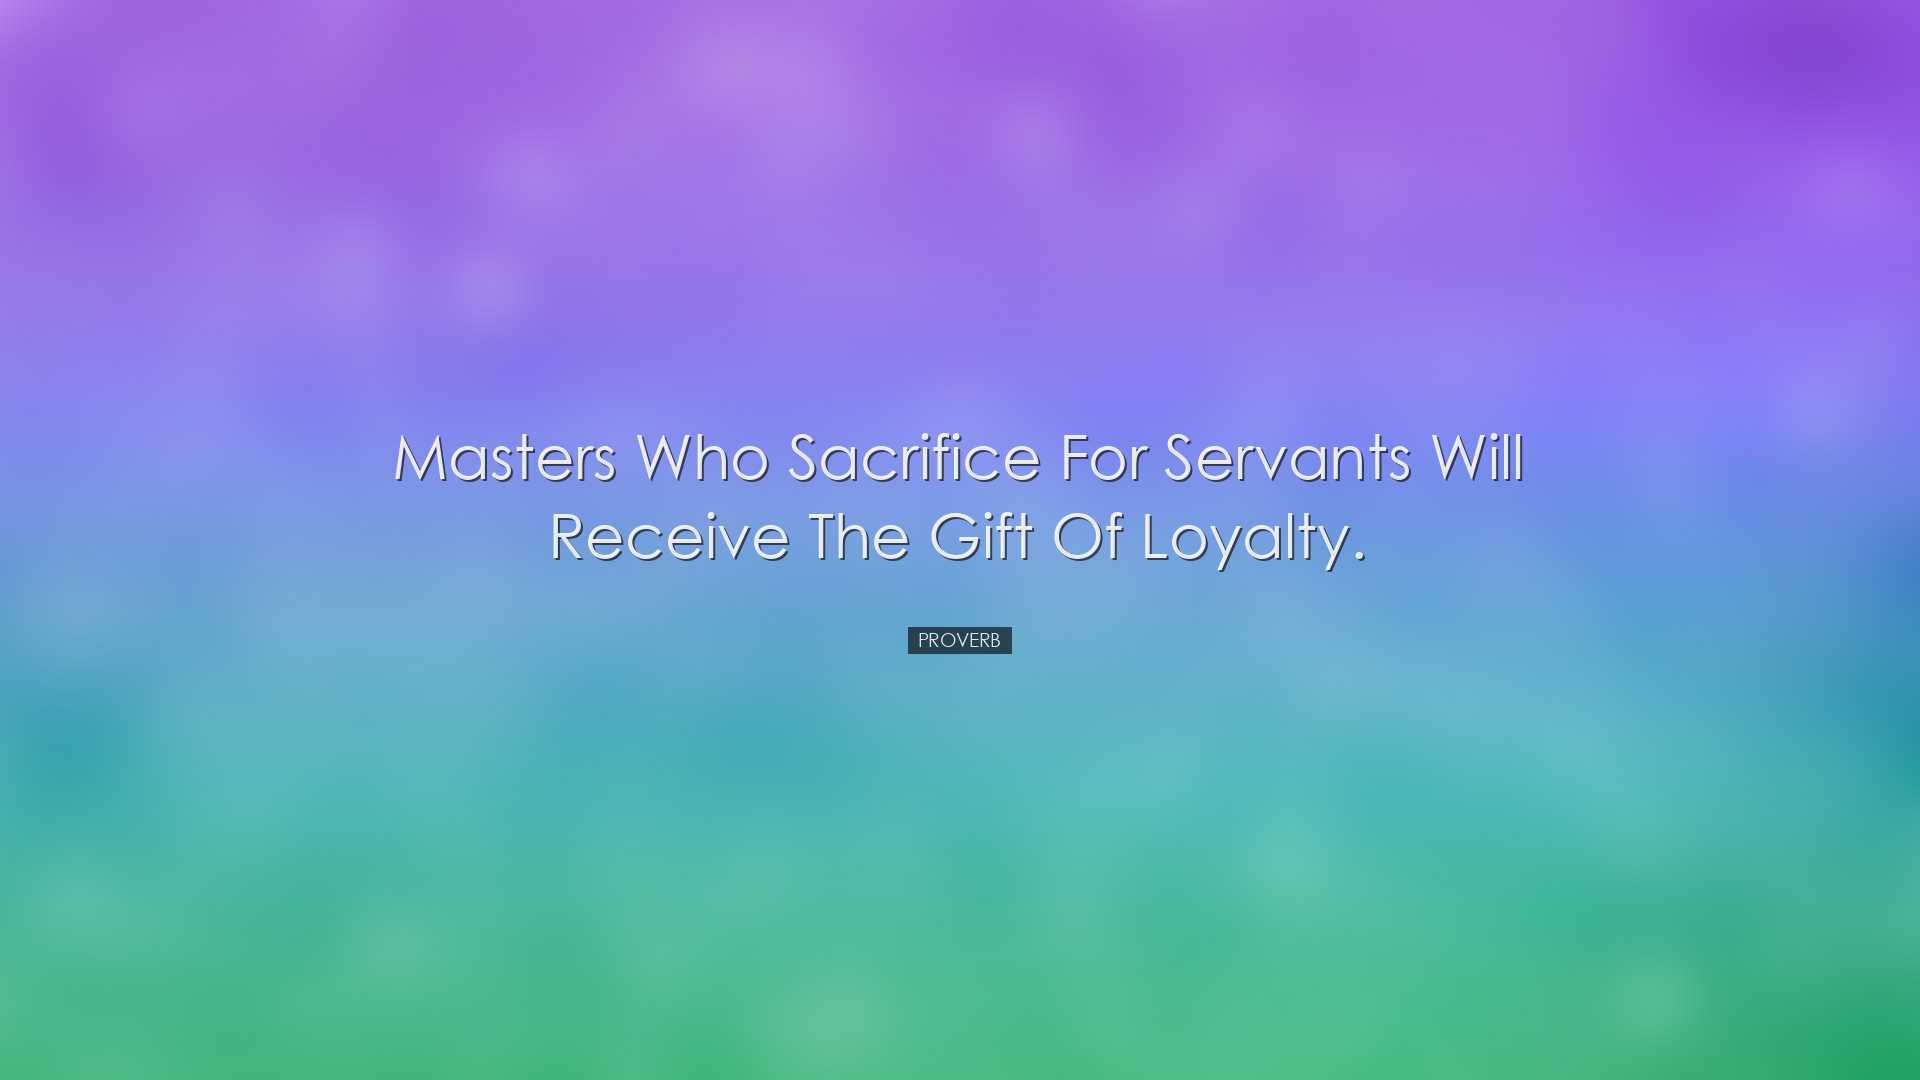 Masters who sacrifice for servants will receive the gift of loyalt